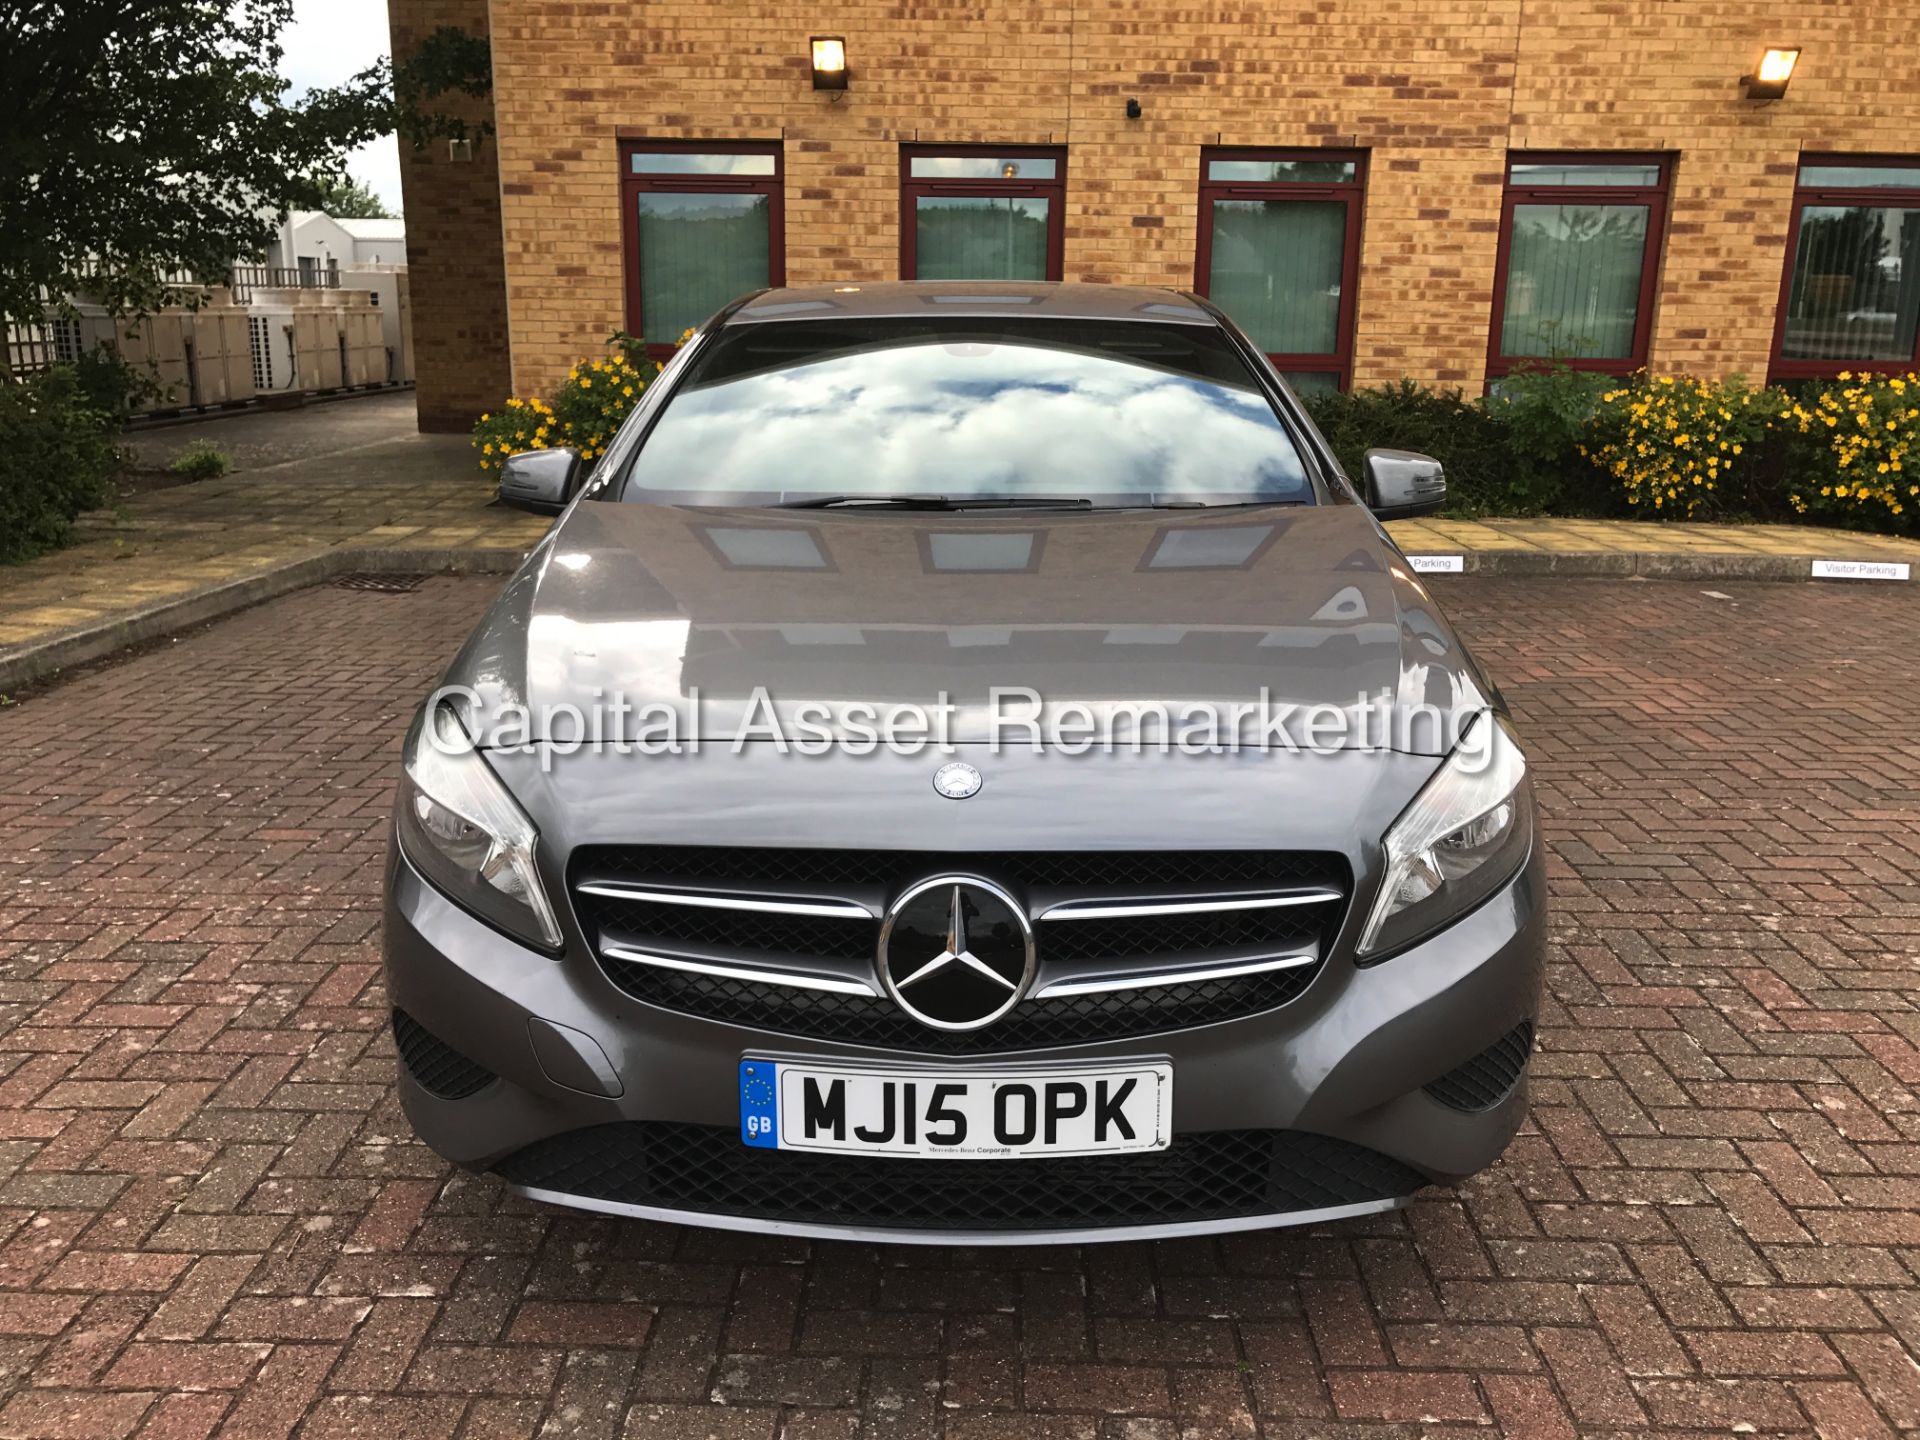 (ON SALE) MERCEDES A180d 7G TRONIC "15 REG" SAT NAV - 1 OWNER - PADDEL SHIFT - CRUISE - AIR CON - Image 2 of 22